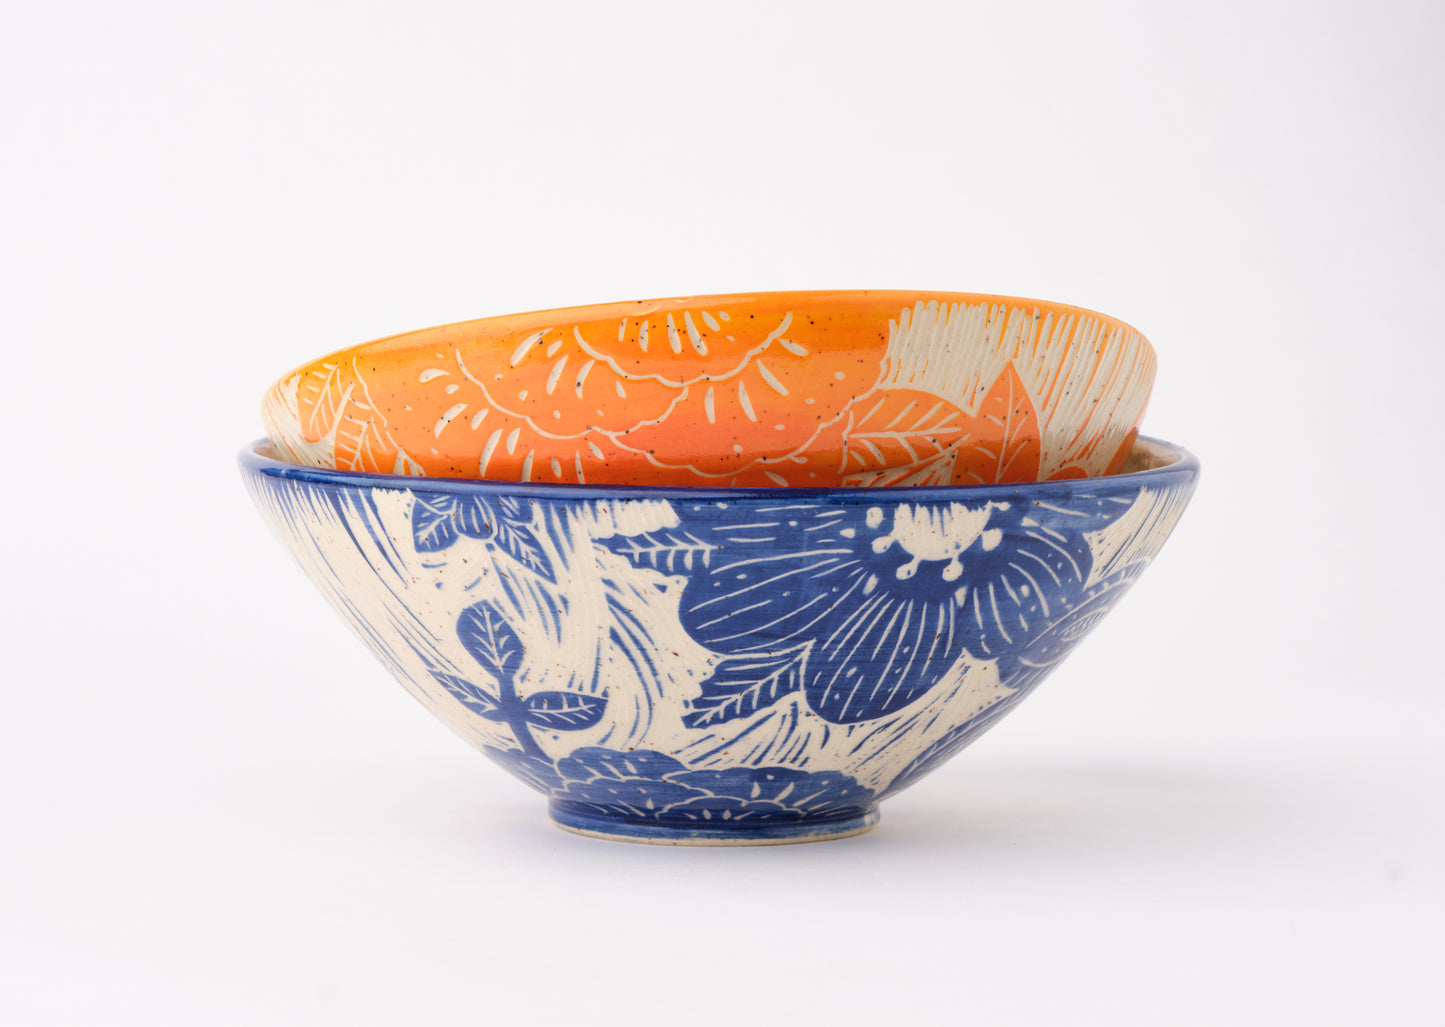 Serving Bowl with Blue Carved Flowers